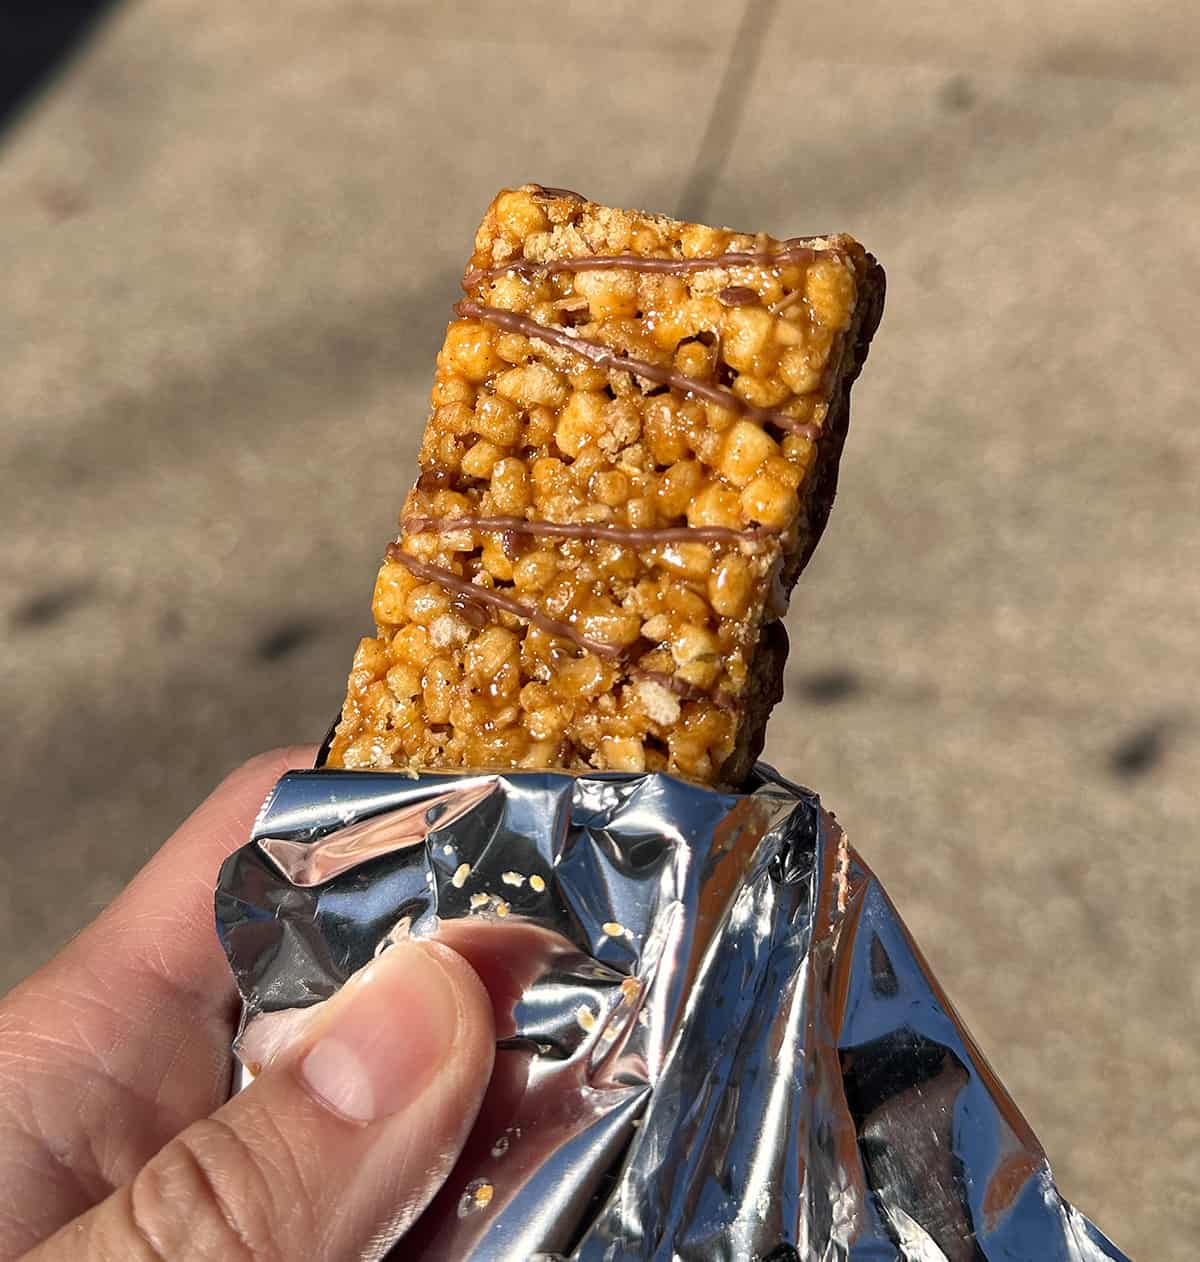 REVIEW: Ready Clean Protein Bars